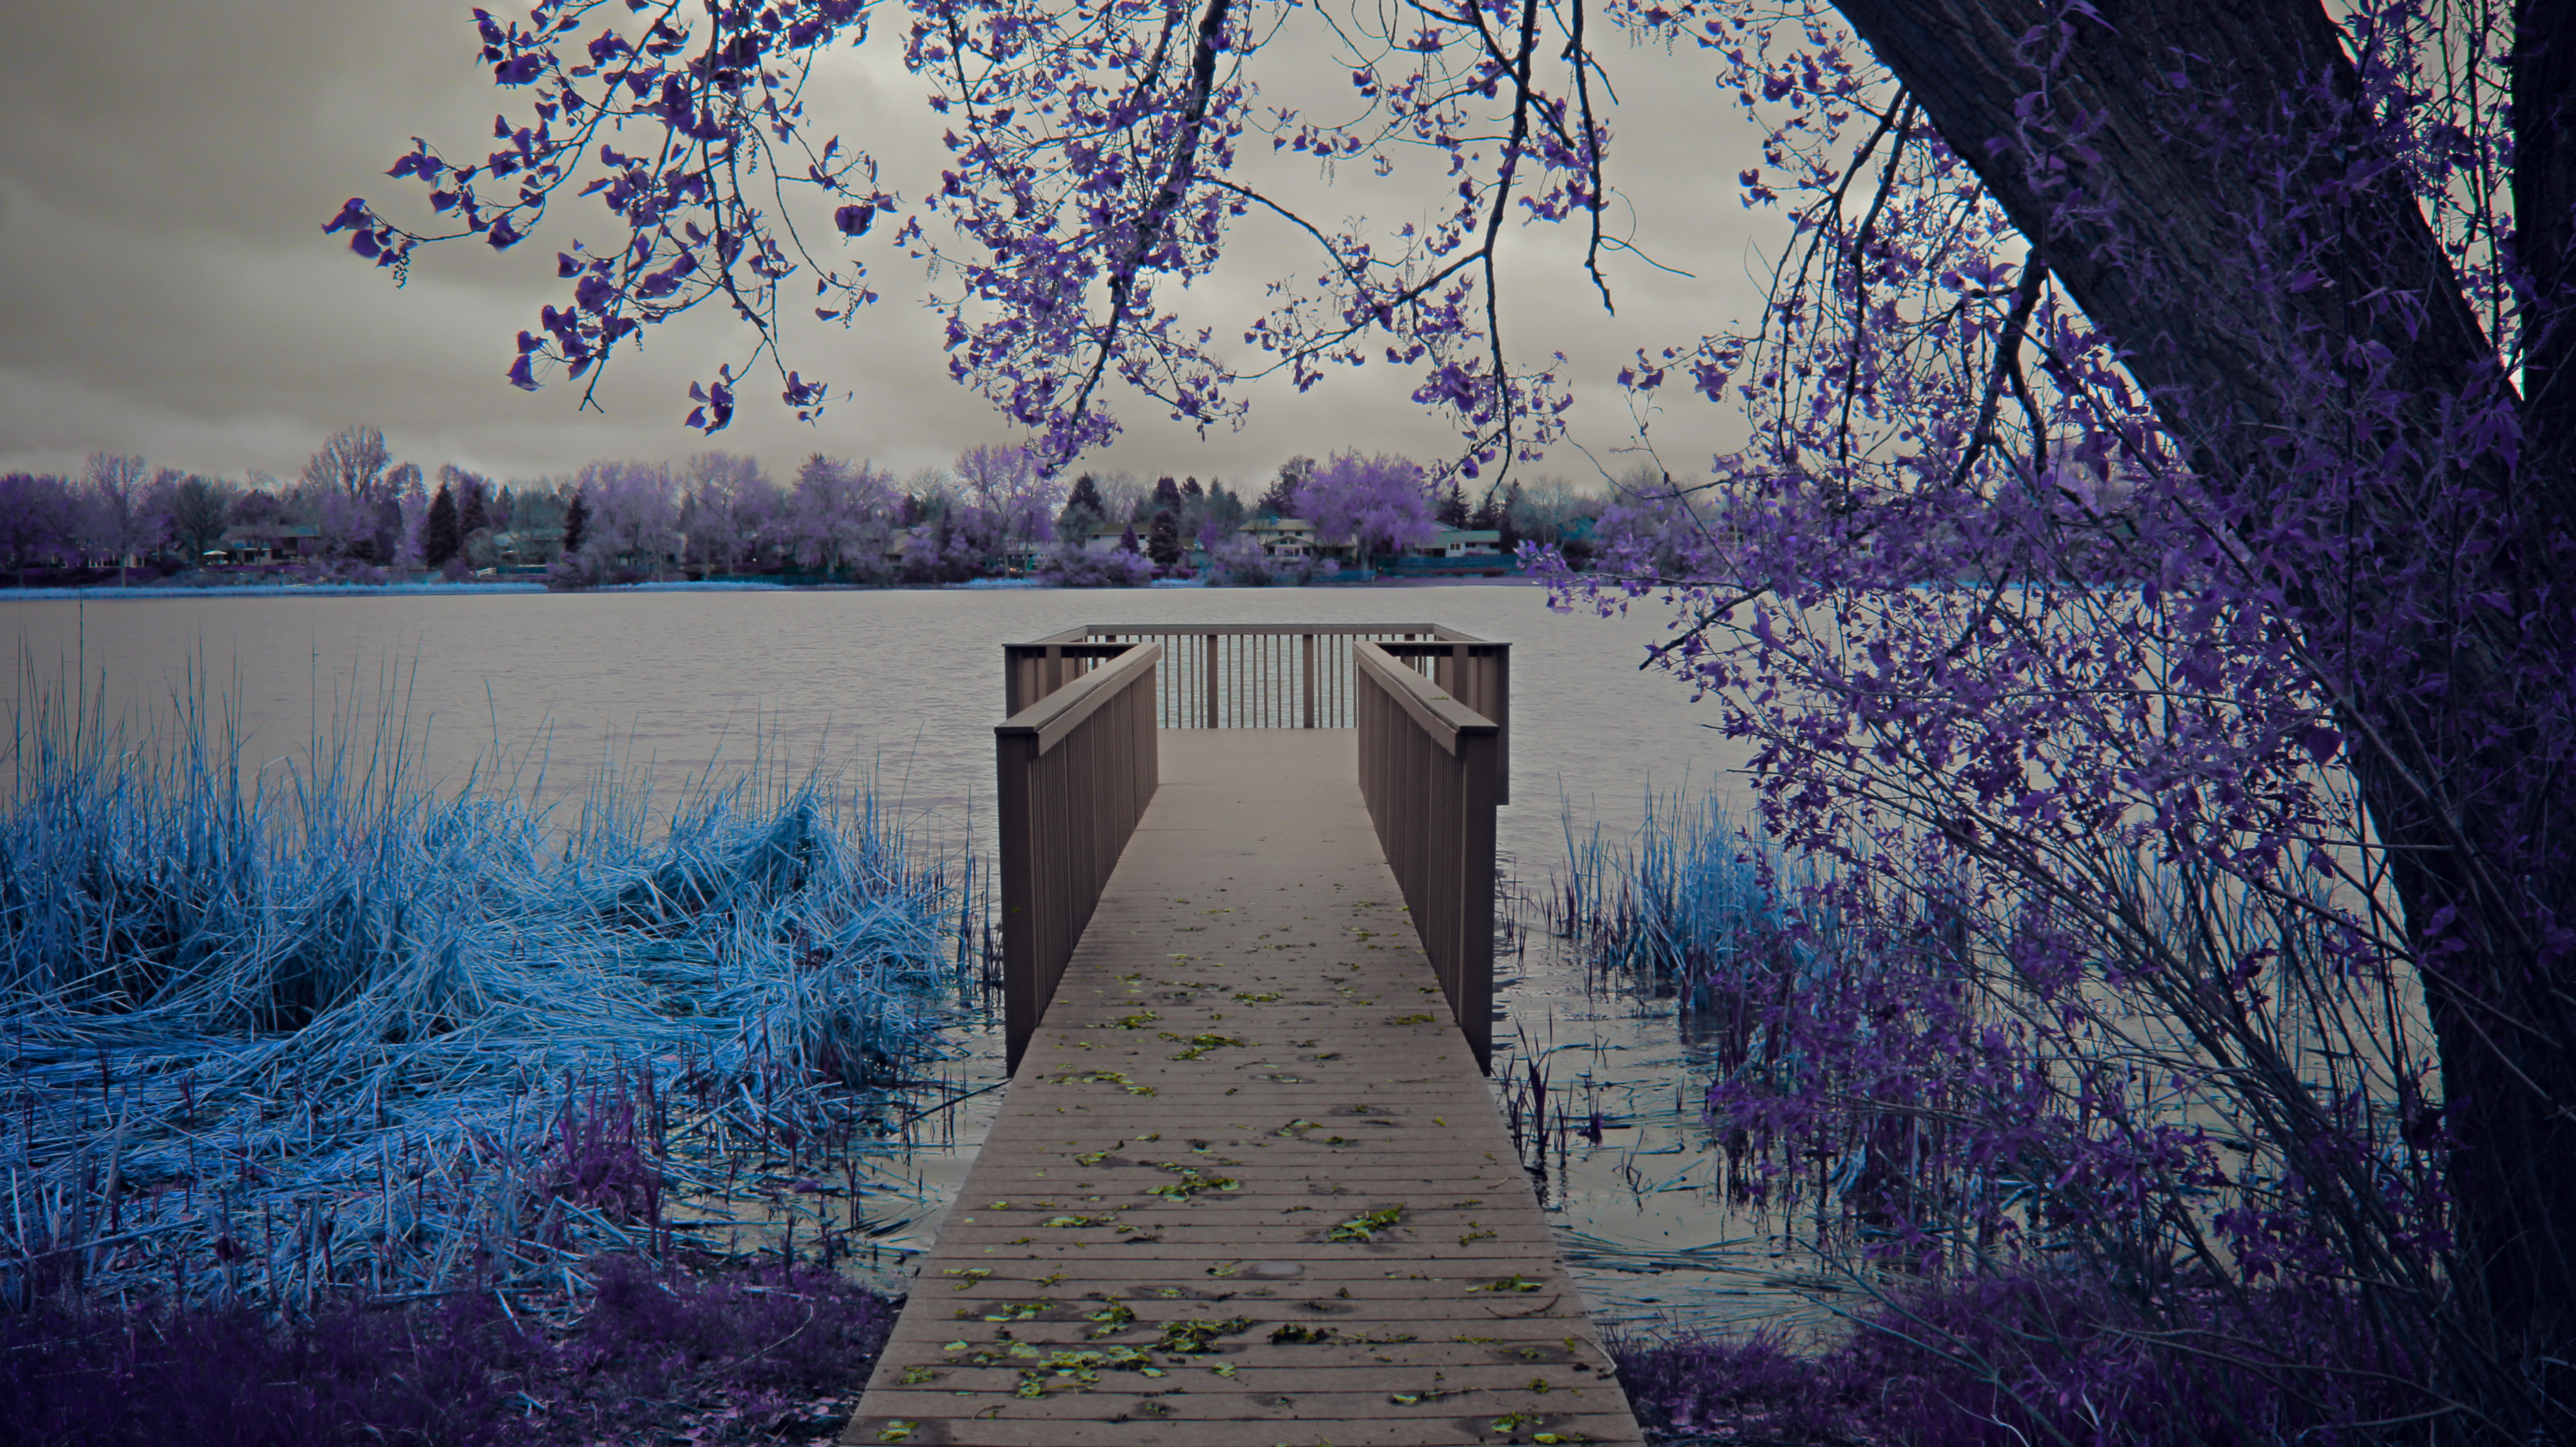 General 5184x2912 water lake trees fall nature blue purple violet turquoise photography digital art infrared